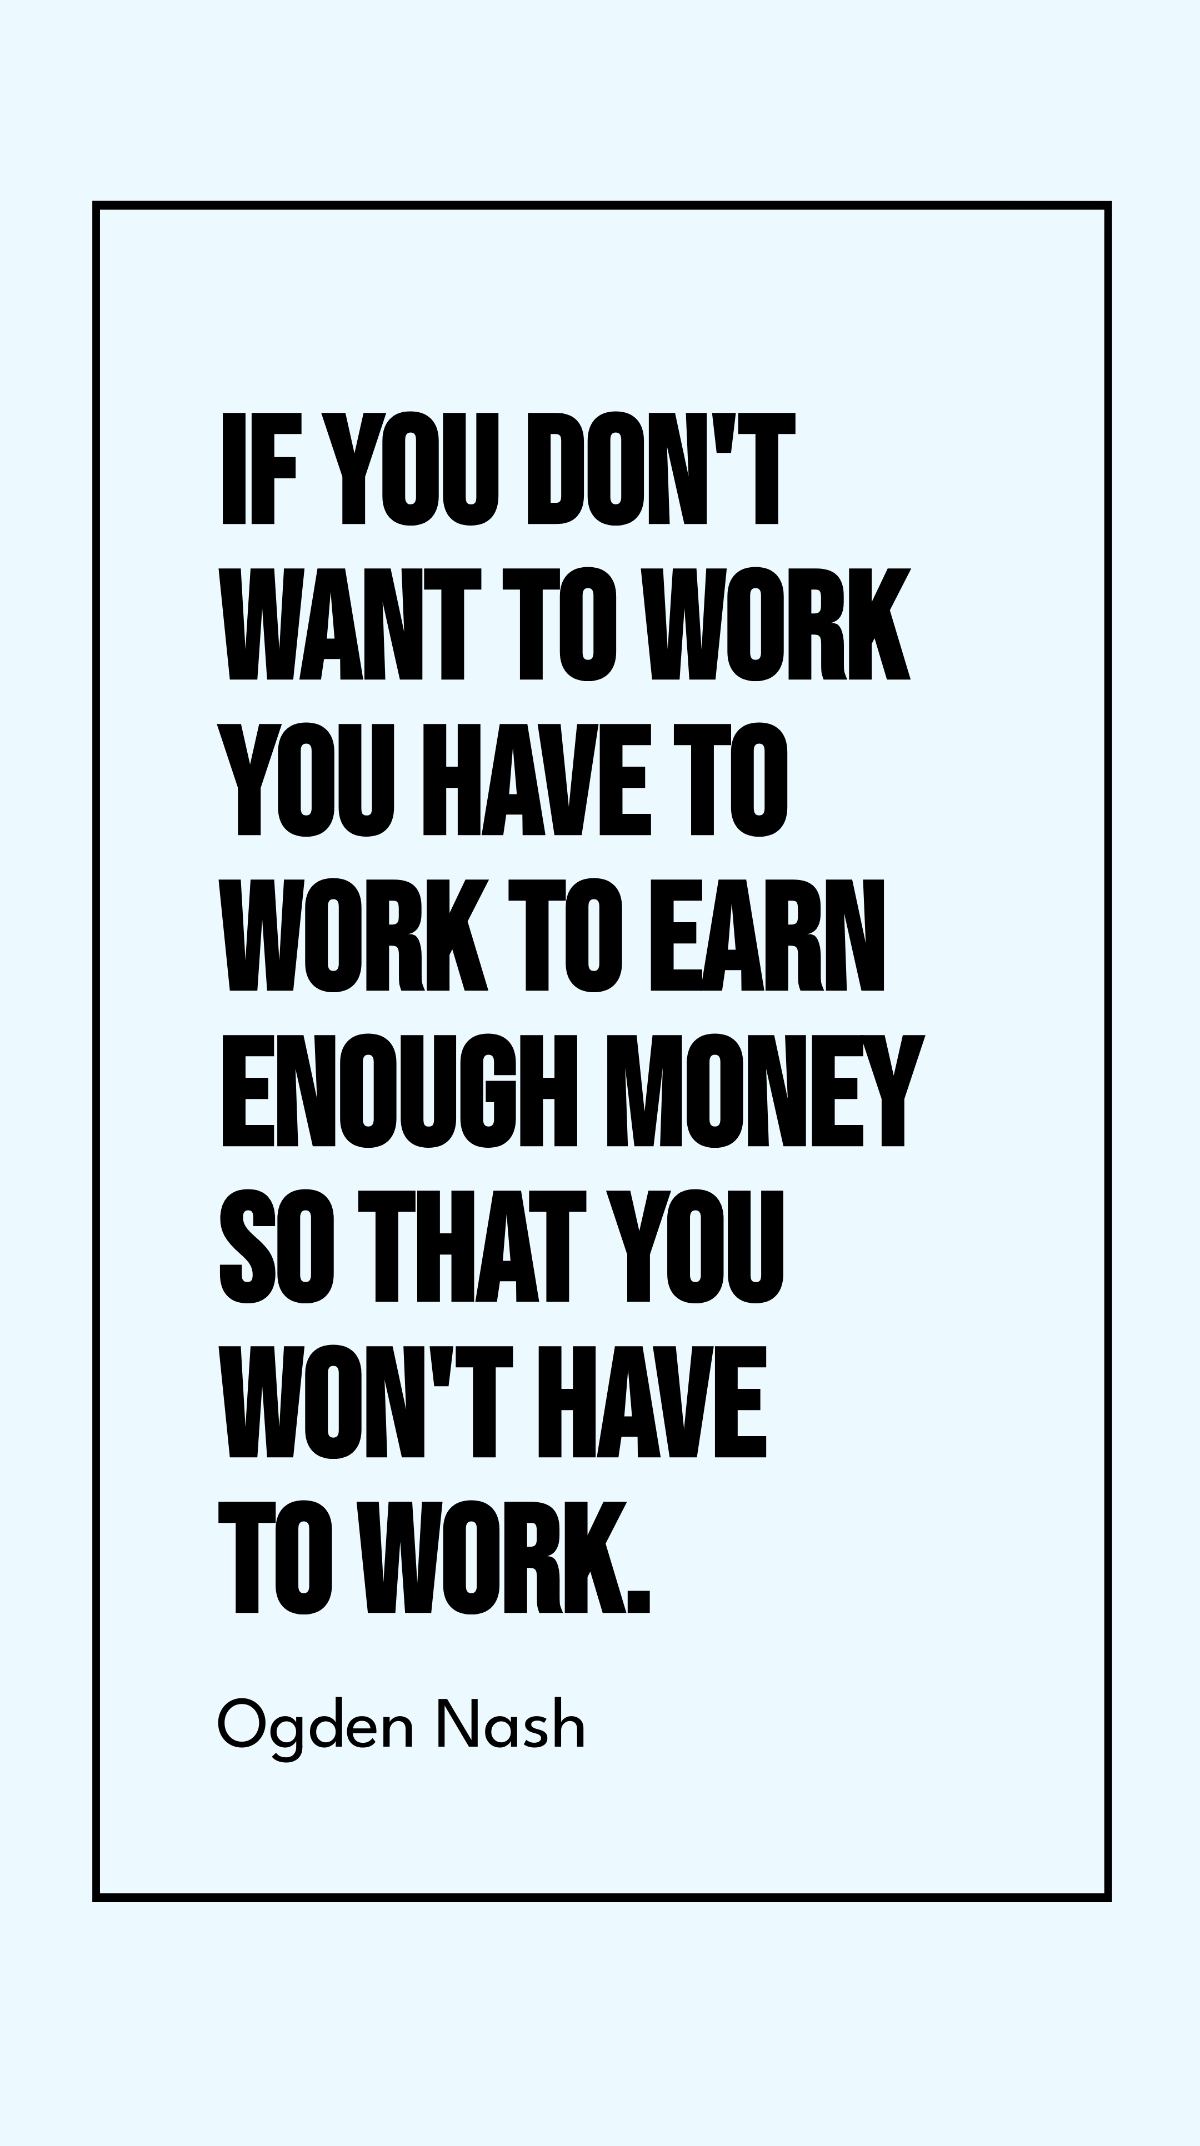 Ogden Nash - If you don't want to work you have to work to earn enough money so that you won't have to work.